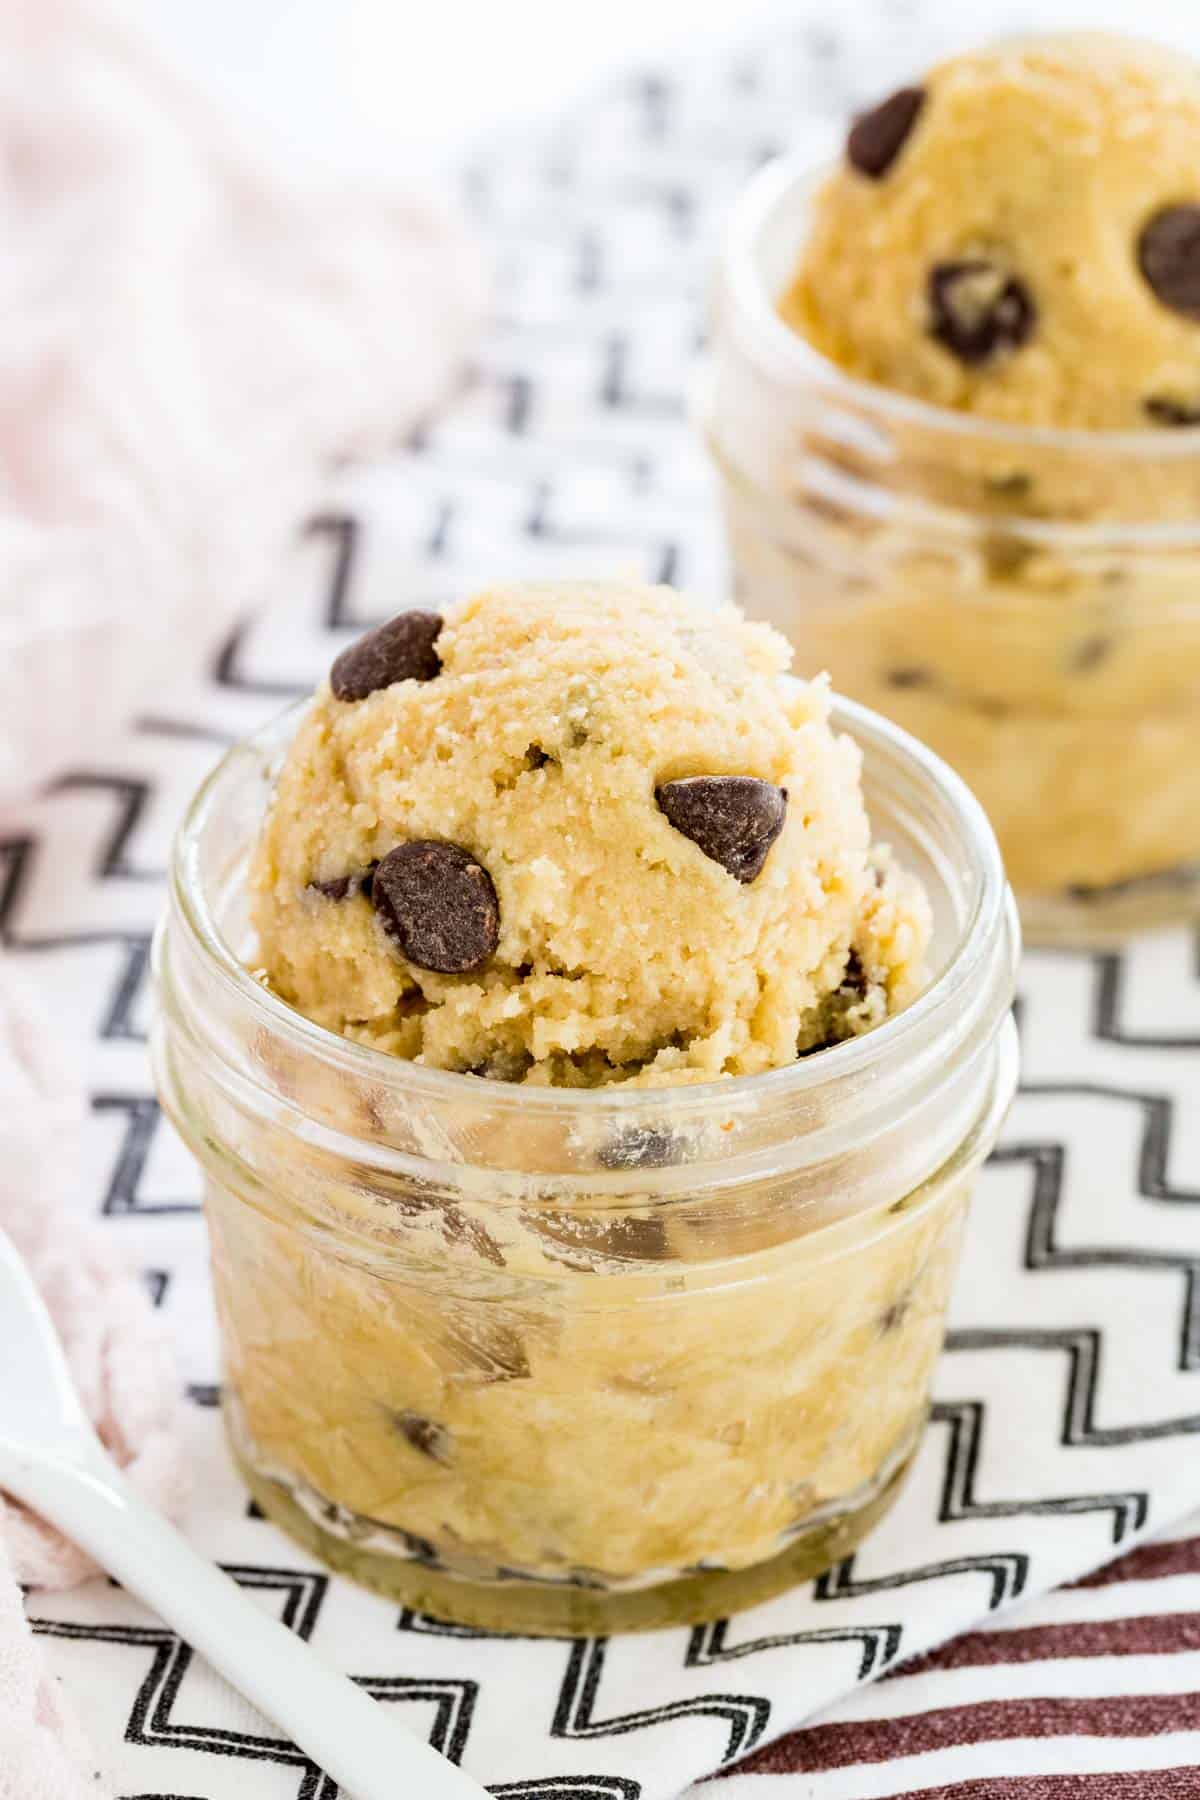 Scoops of gluten-free chocolate chip cookie dough in a glass mason jar.